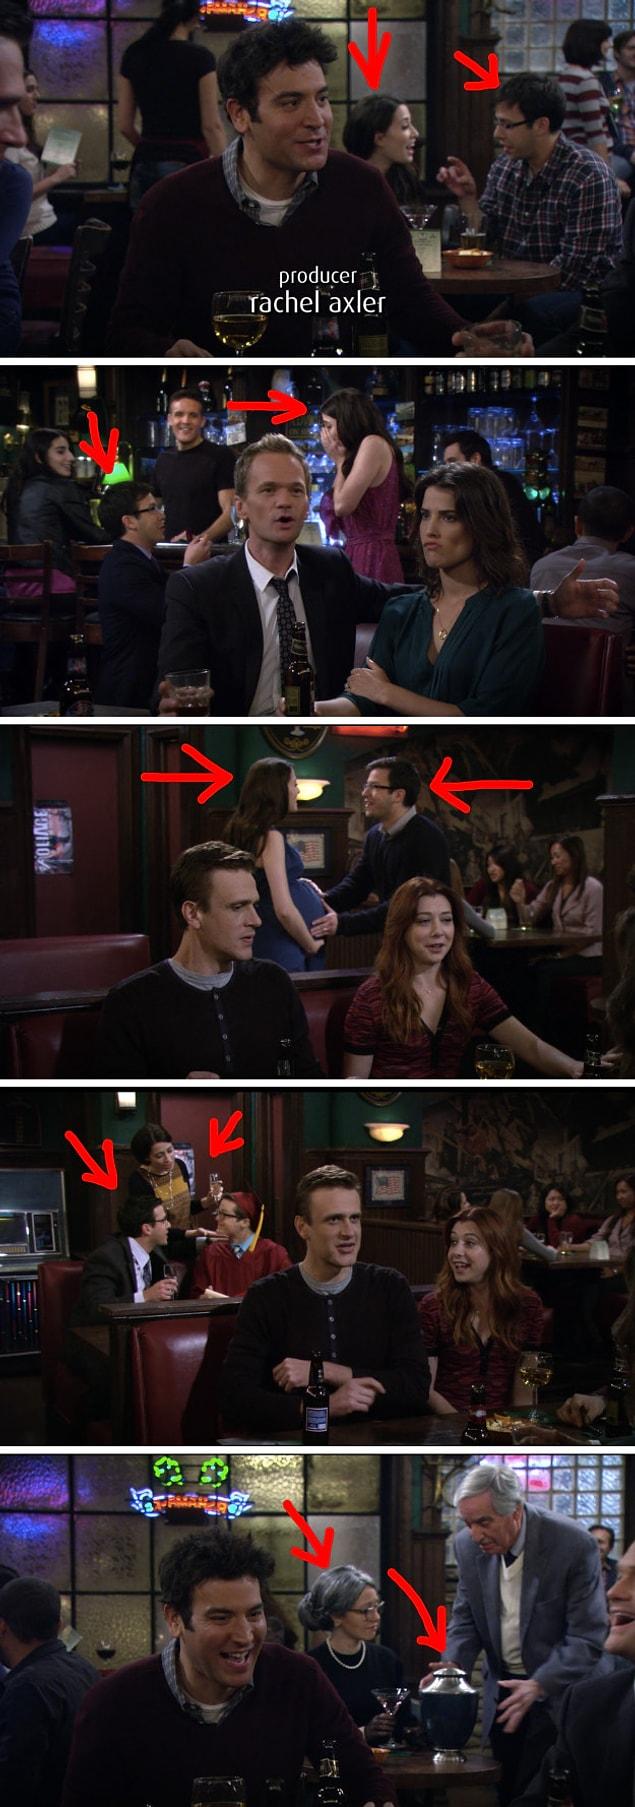 2. This couple in the background, who went from talking to getting engaged, to making a baby, to celebrating their kid's graduation, to the husband passing away, all in one scene.